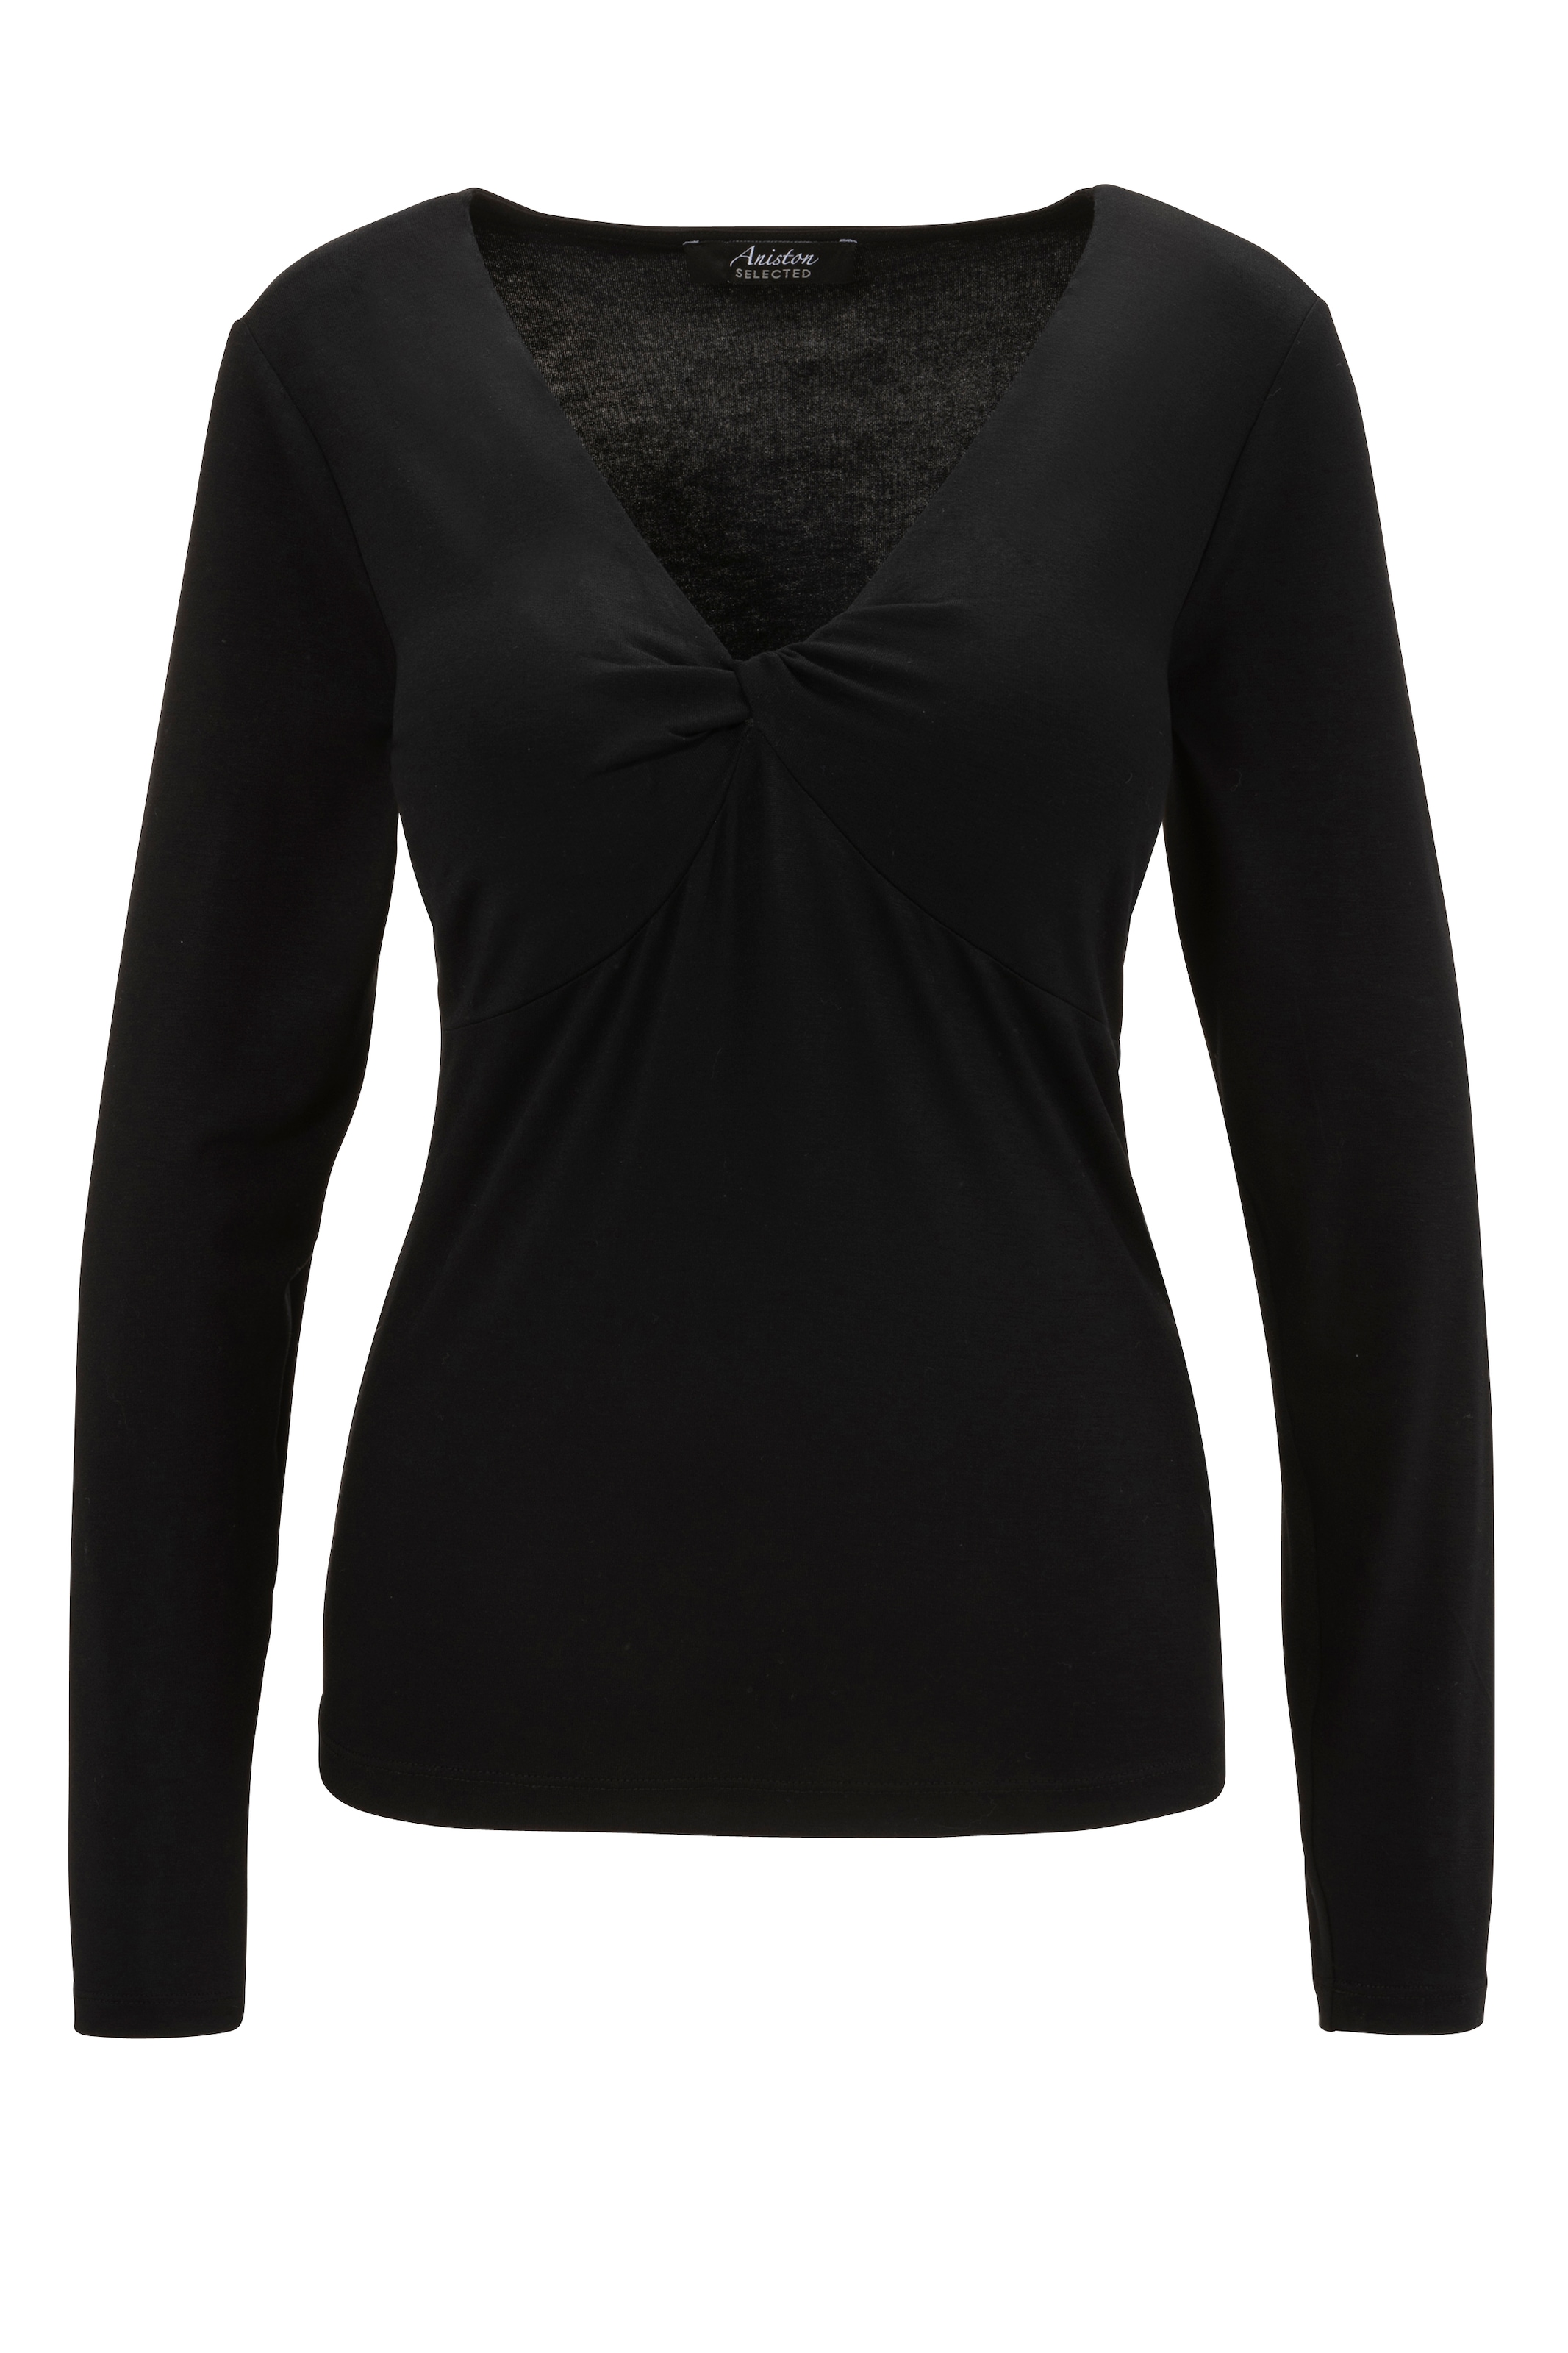 Knotendetail Basic SELECTED mit Longsleeve, Aniston online